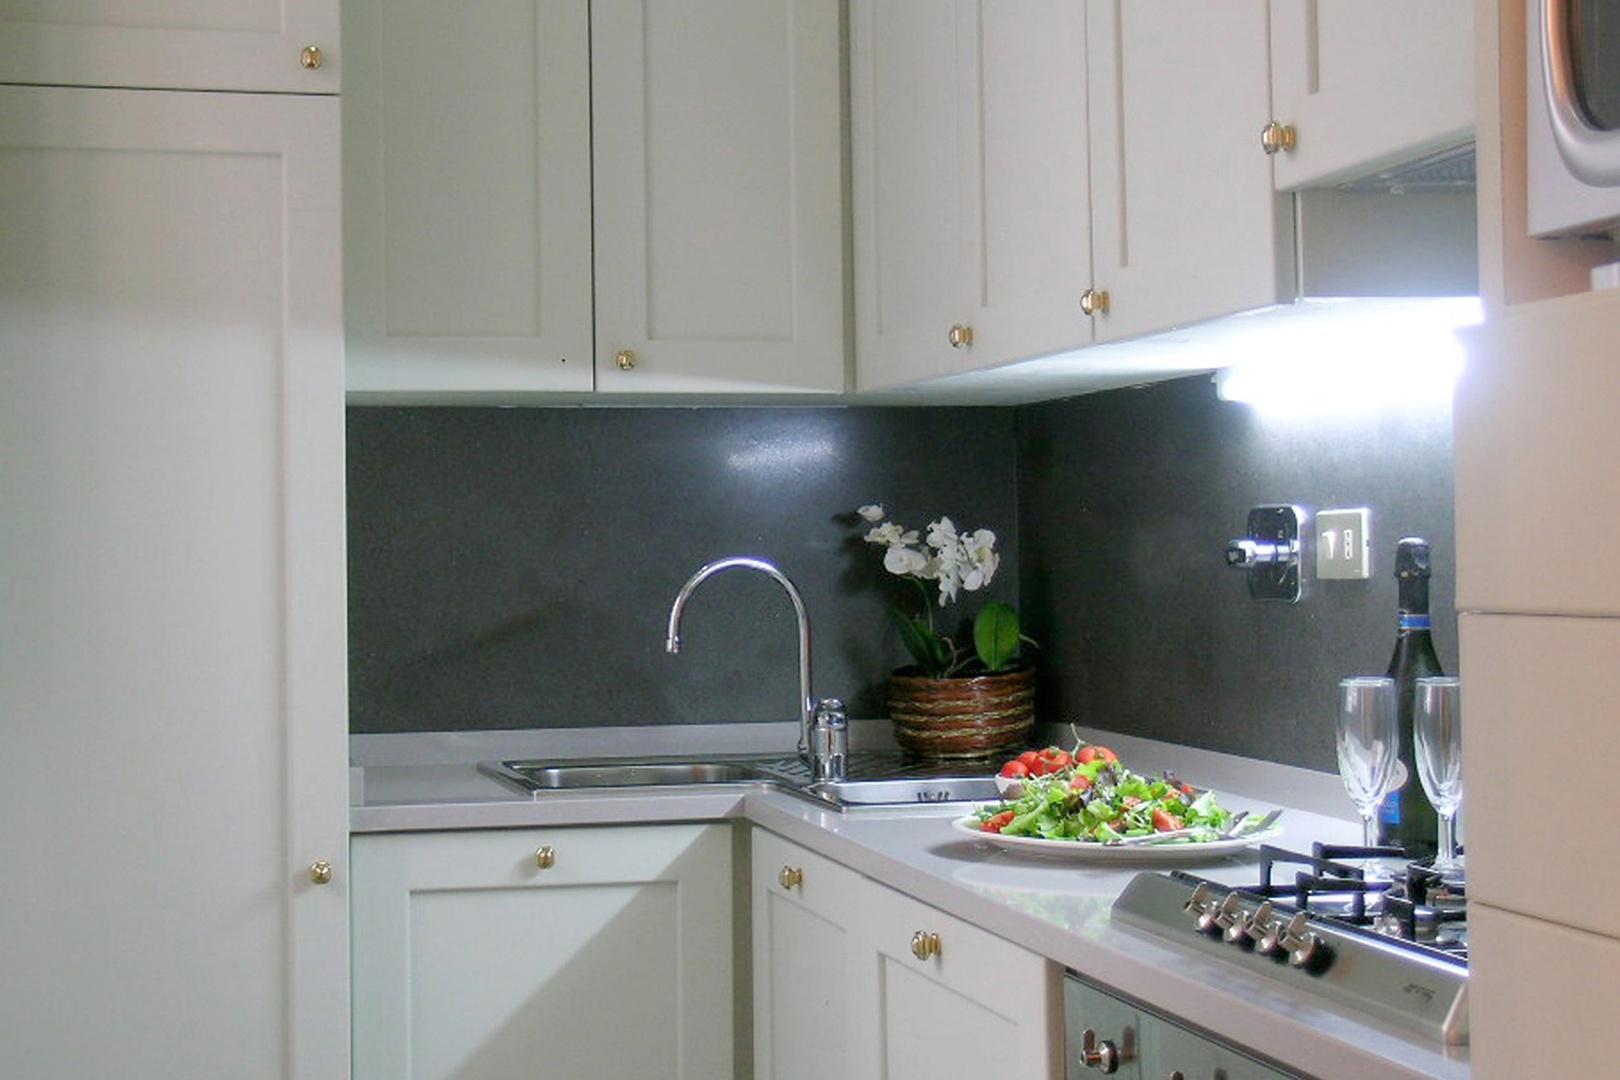 A modern kitchen glistens with microwave, oven, four burner stovetop and dishwasher.